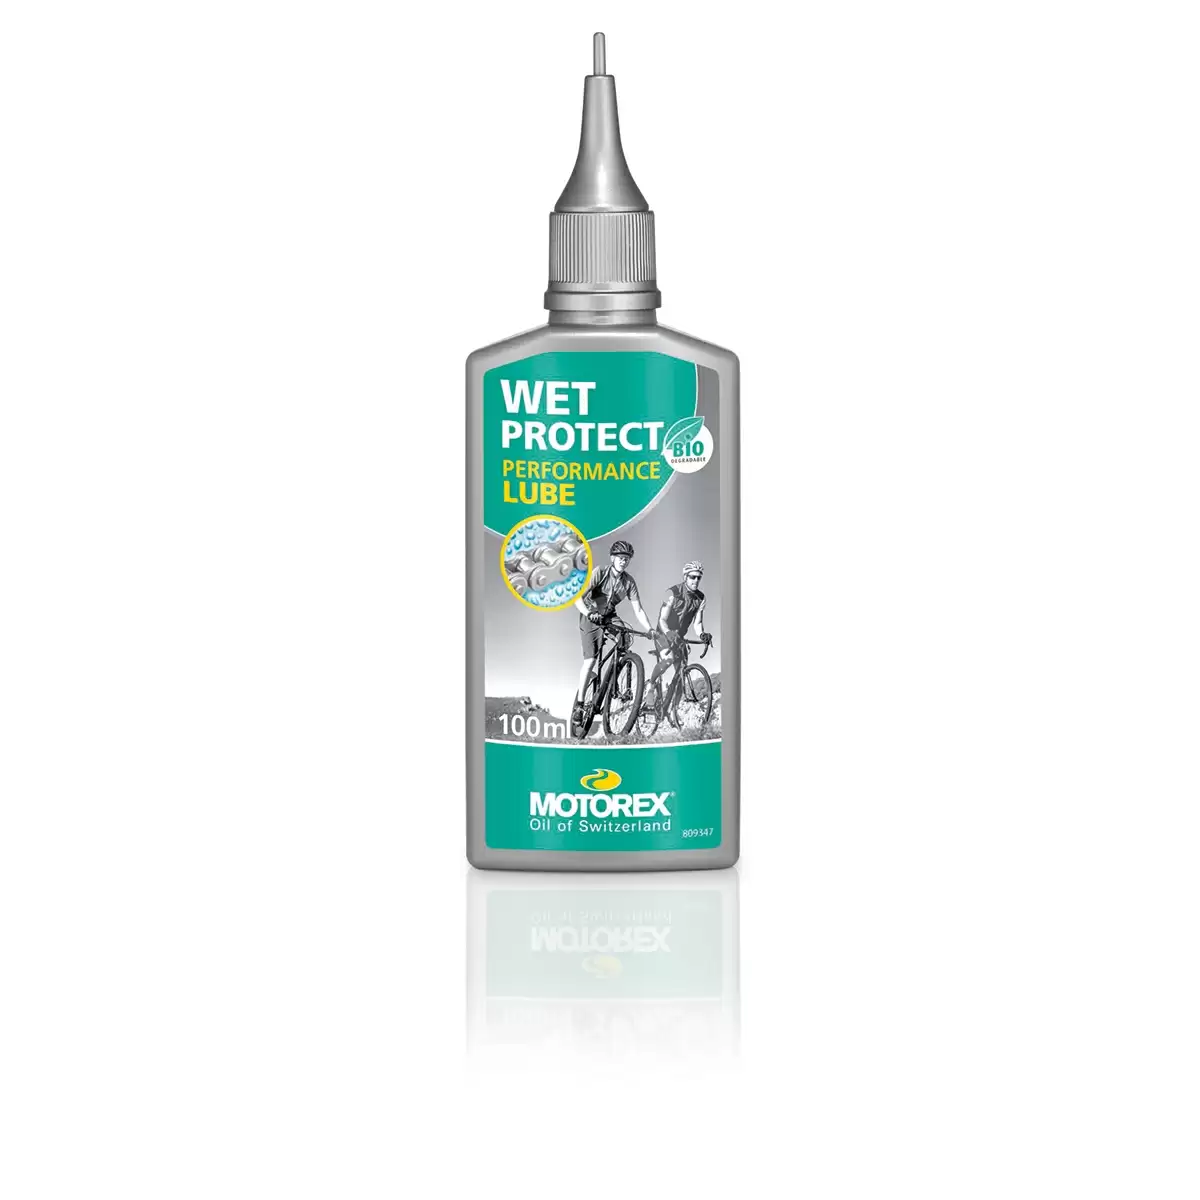 Wet Protect Lube Water Repellent Botella antioxidante 100ml - image